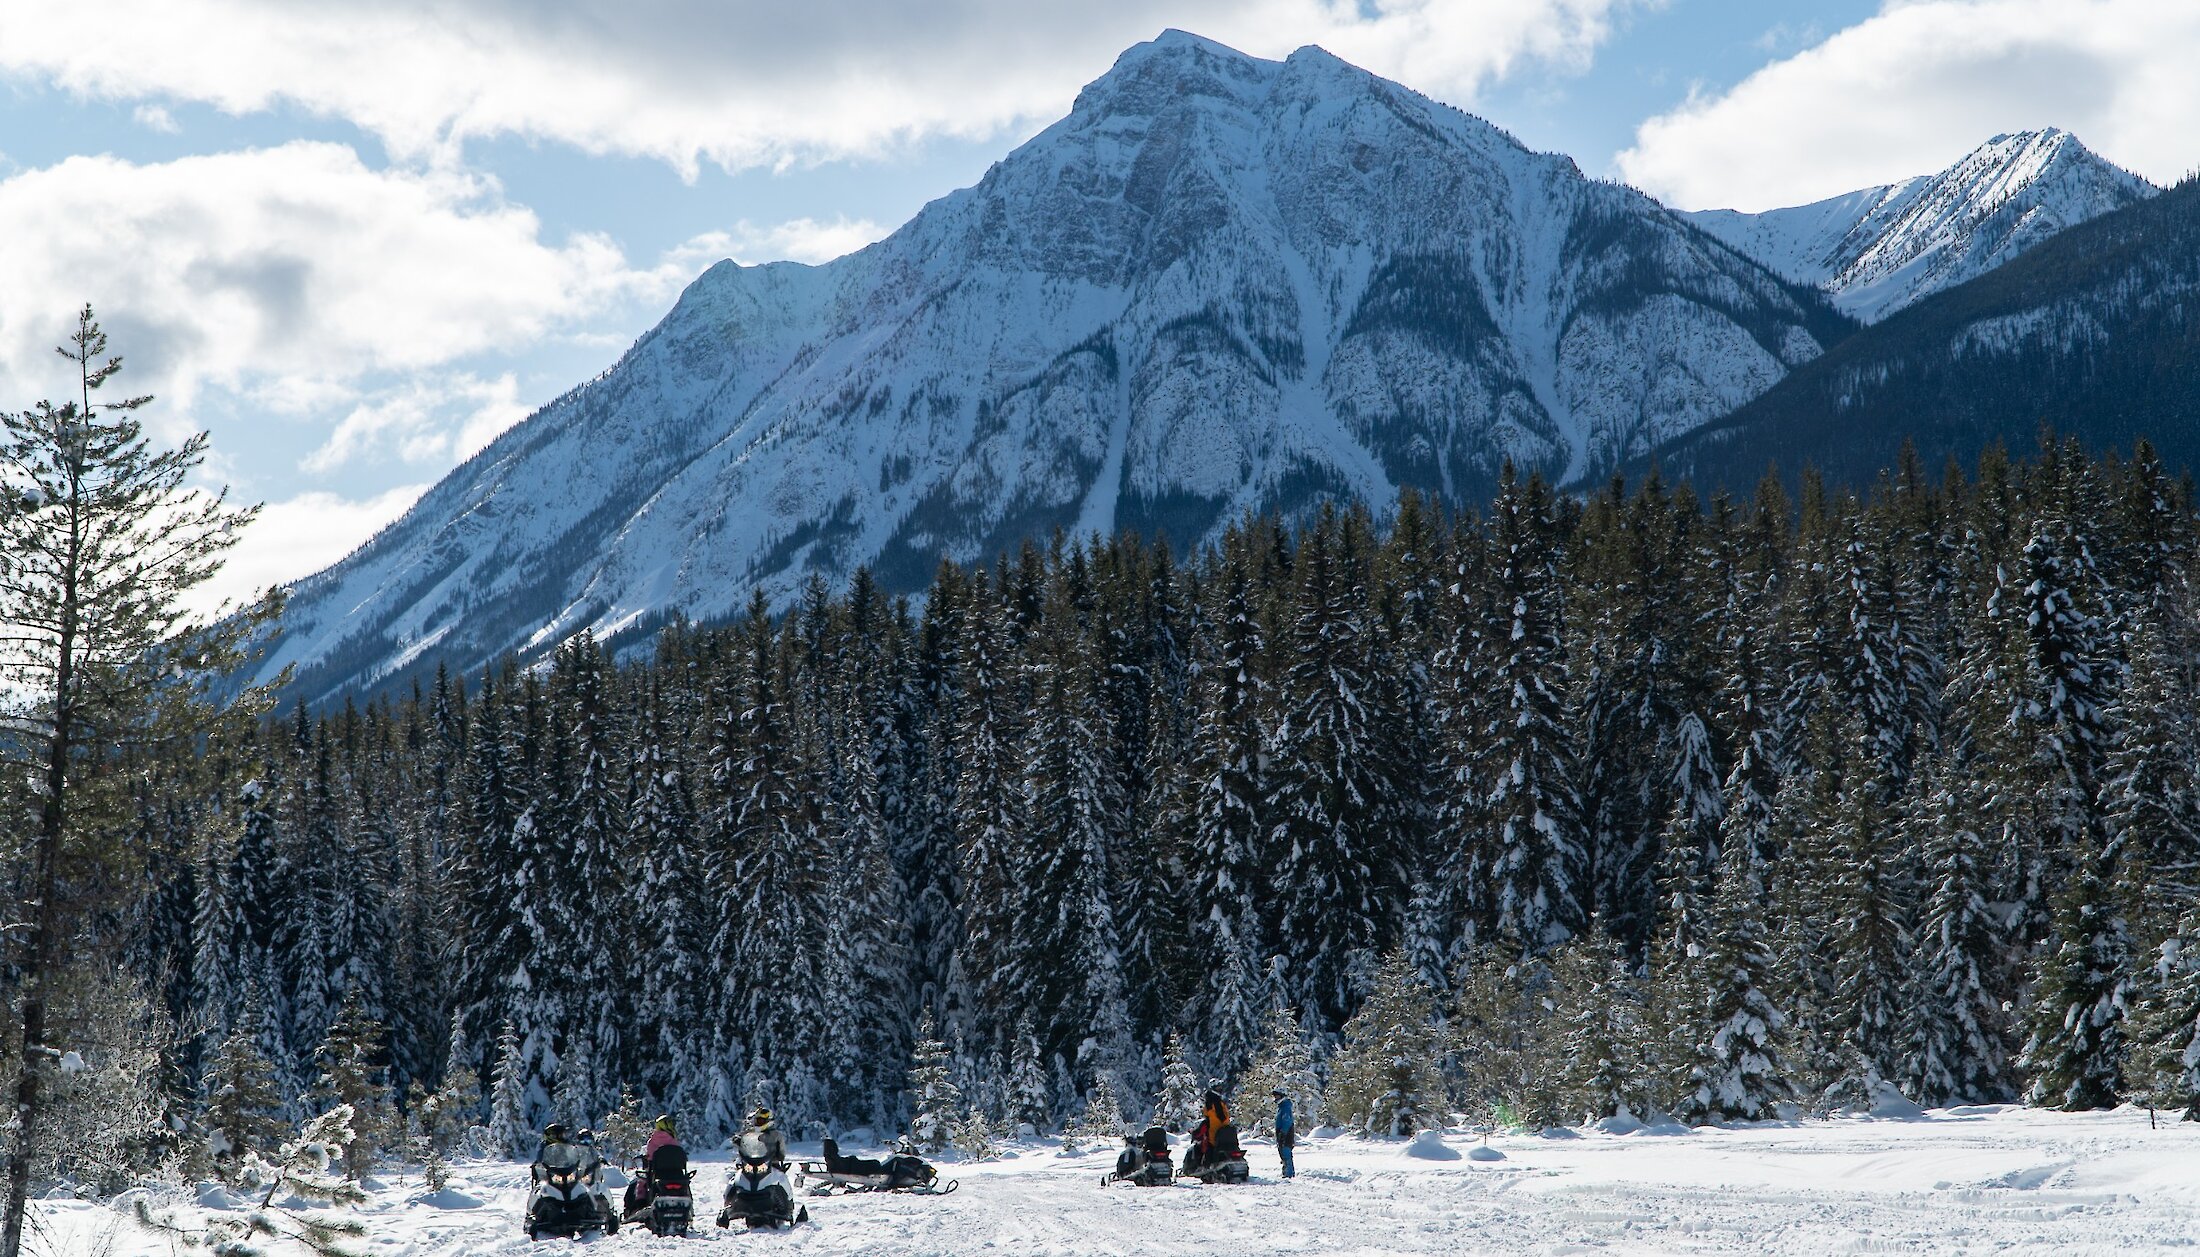 Snowmobilers admiring the view on the snowmobile trail in Golden